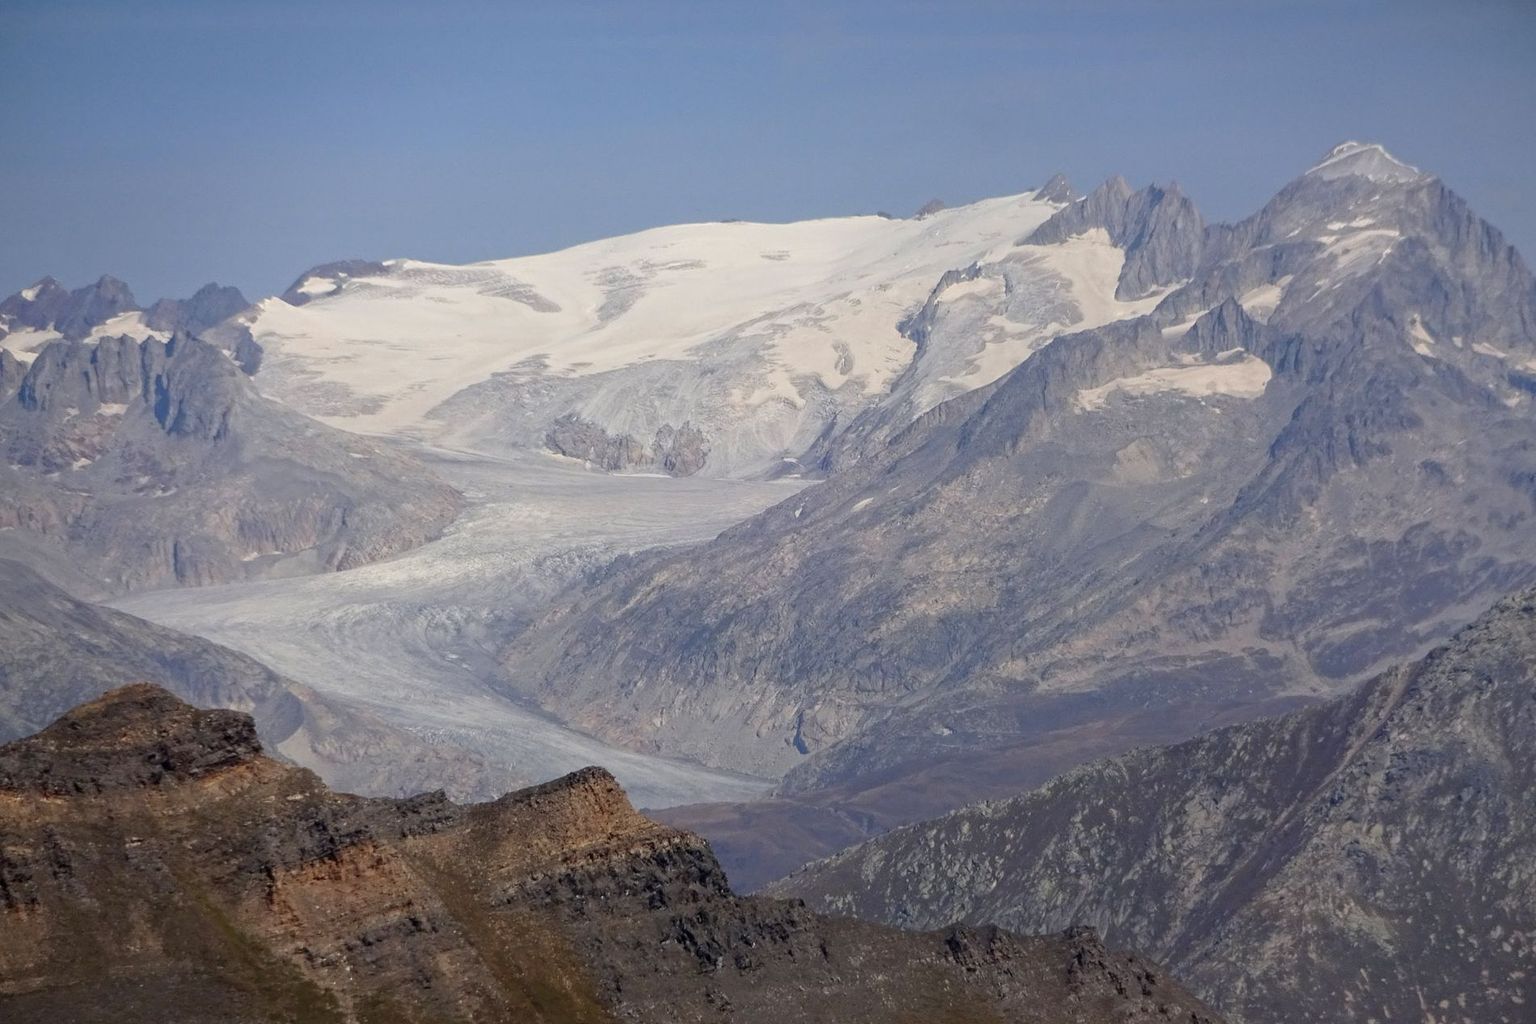 In contrast to other glaciers, Rhone Glacier (VS) also had an accumulation area this year (winter snow lasted all summer) - but this is clearly too small to keep the glacier in balance.